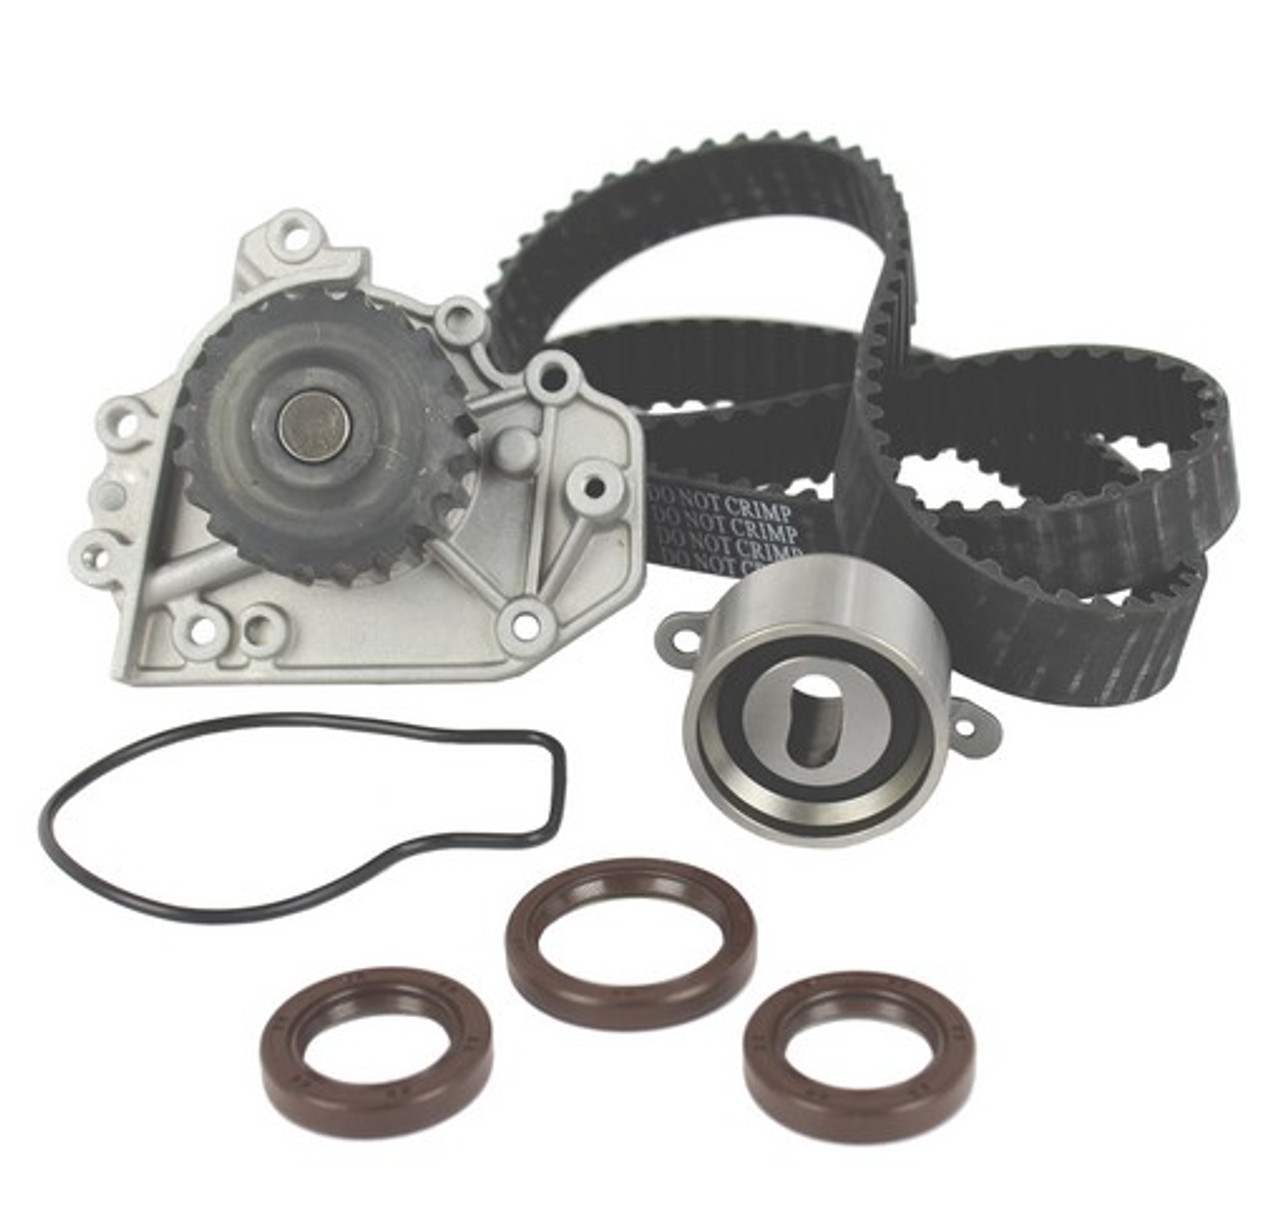 1992 Acura Integra 1.7L Timing Belt Kit with Water Pump TBK217WP.E1